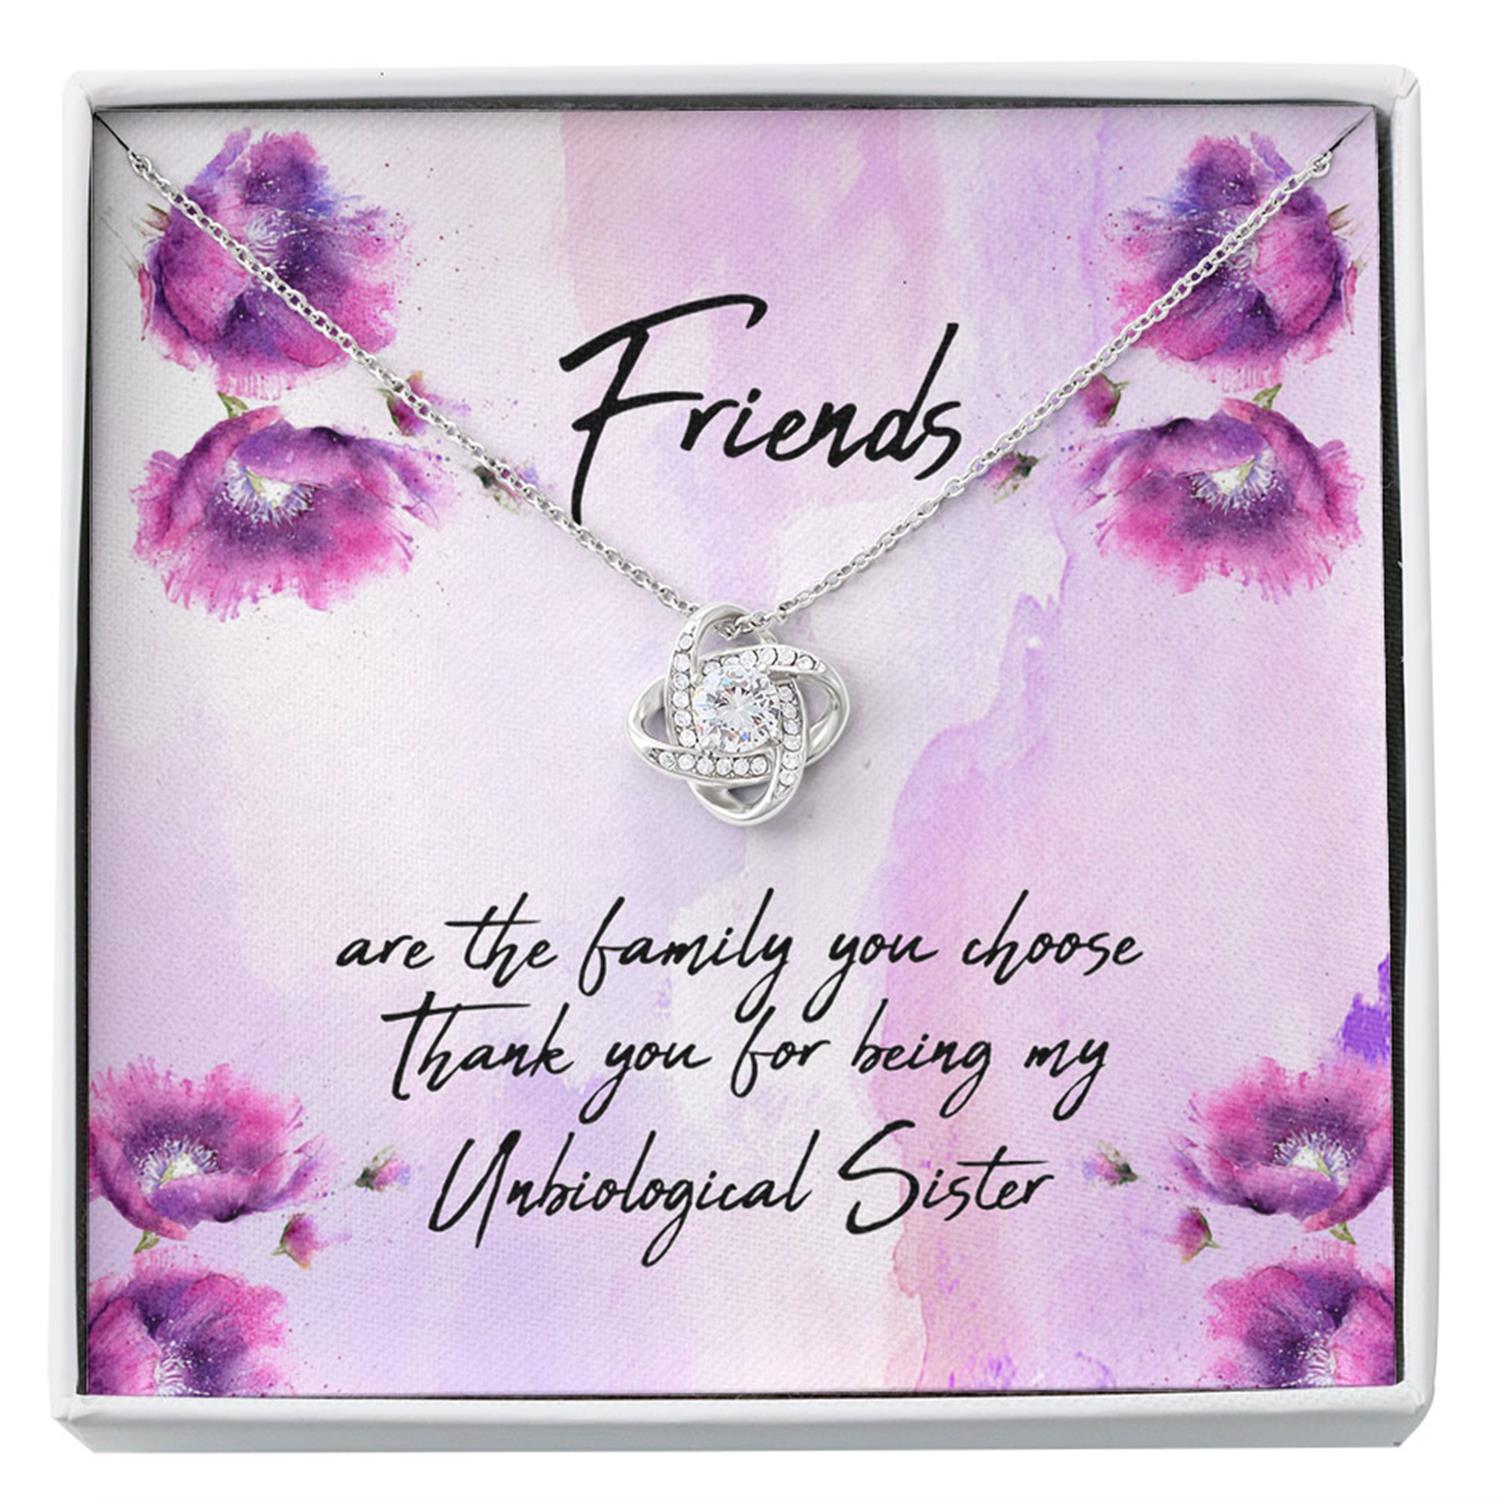 Sister Necklace, Thank You For Being My Unbiological Sister Necklace Gift Friends Are The Family You Choose Custom Necklace